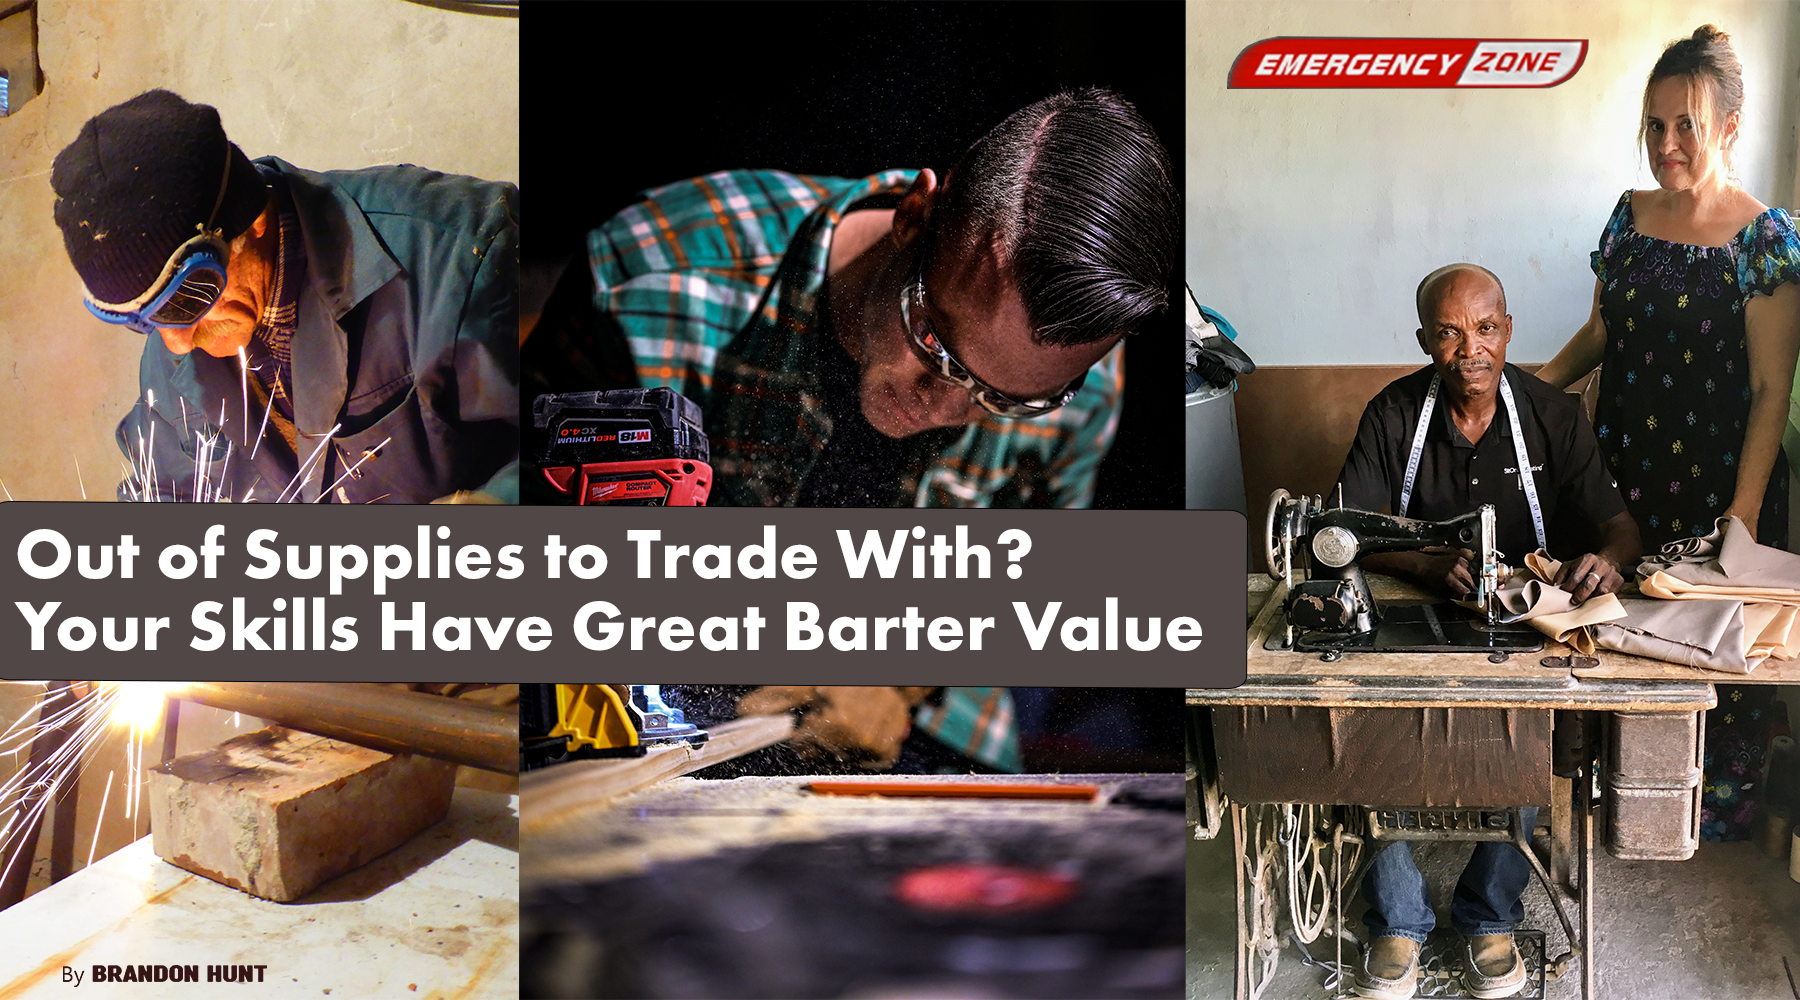 Out of Supplies to Trade With? Your Skills Have Great Barter Value